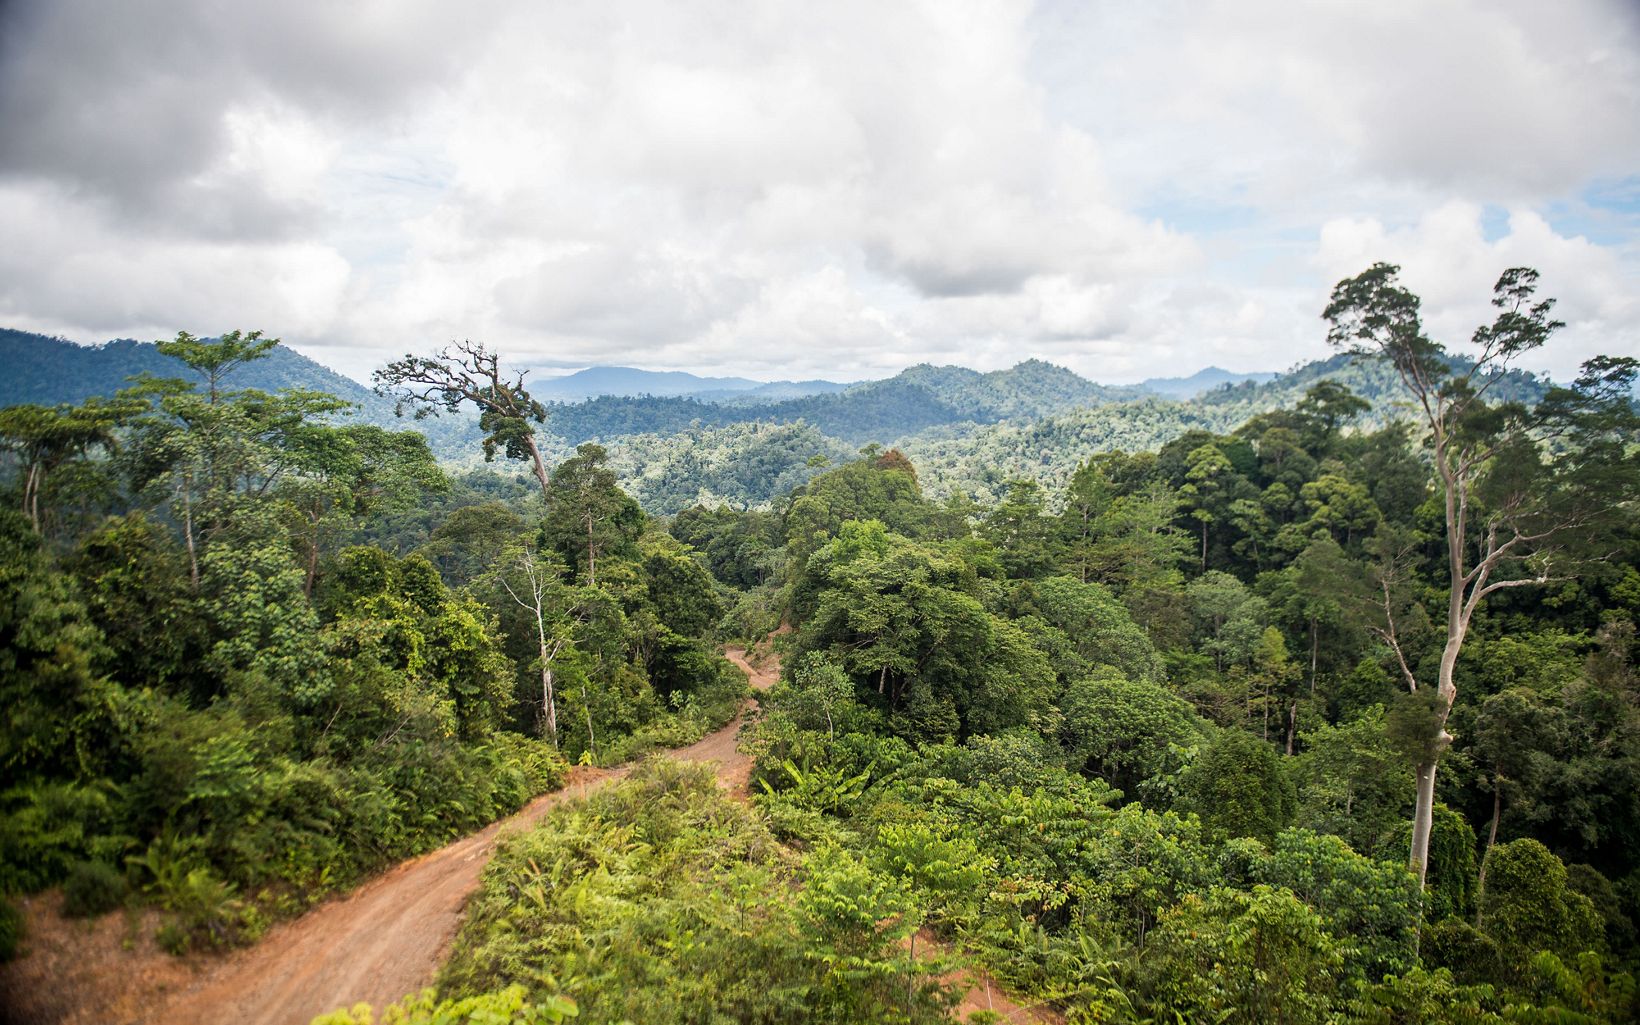 While no panacea, RIL-C has huge potential to reconcile economic and environmental goals. After all, a world with more forests –stores of biodiversity and carbon – bodes well for people and nature alike. © Nick Hall